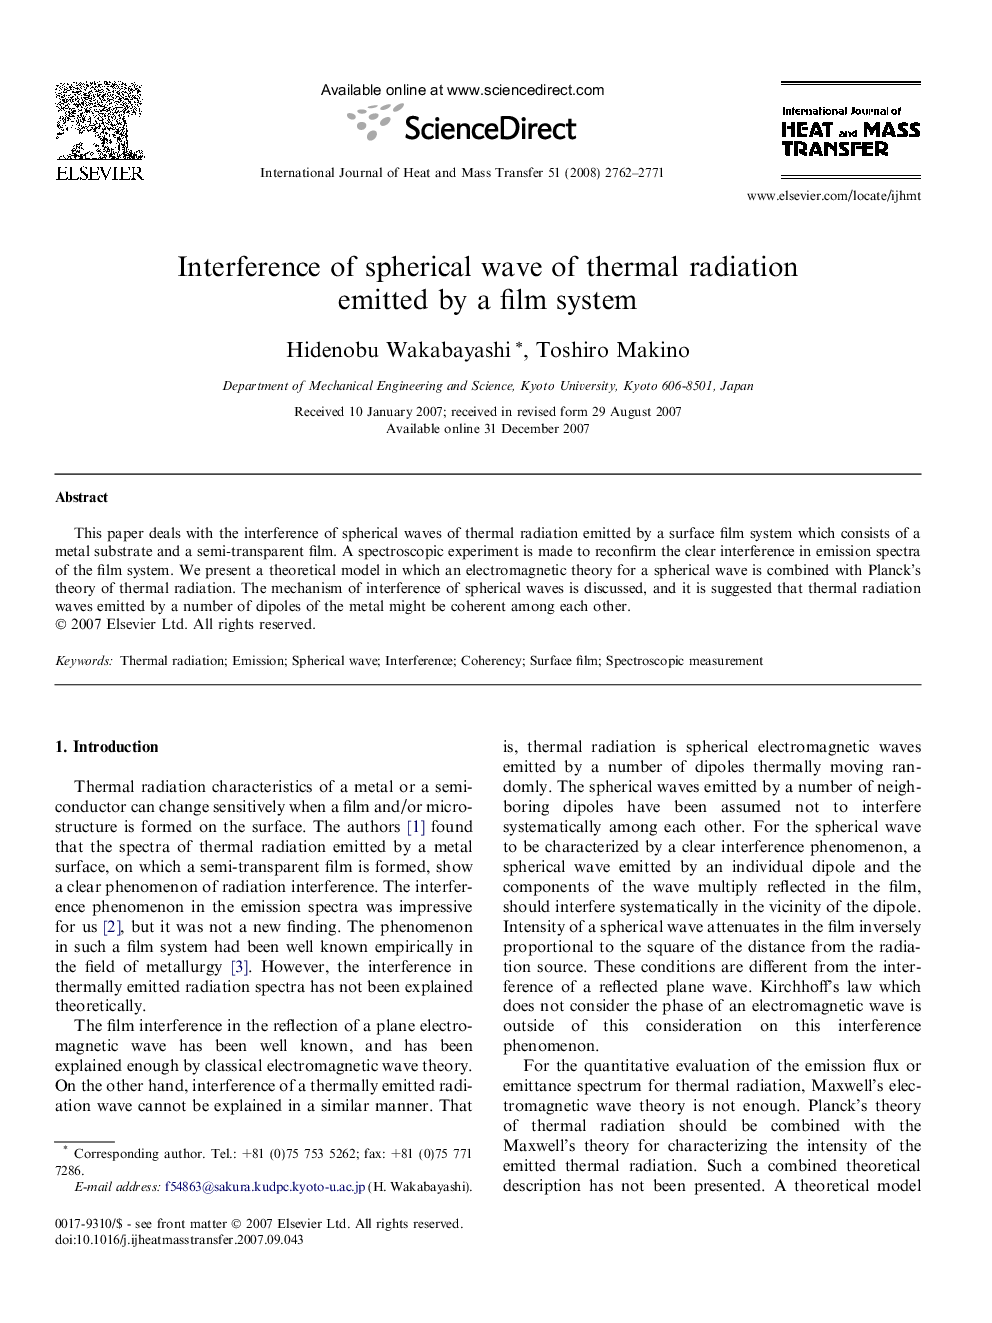 Interference of spherical wave of thermal radiation emitted by a film system